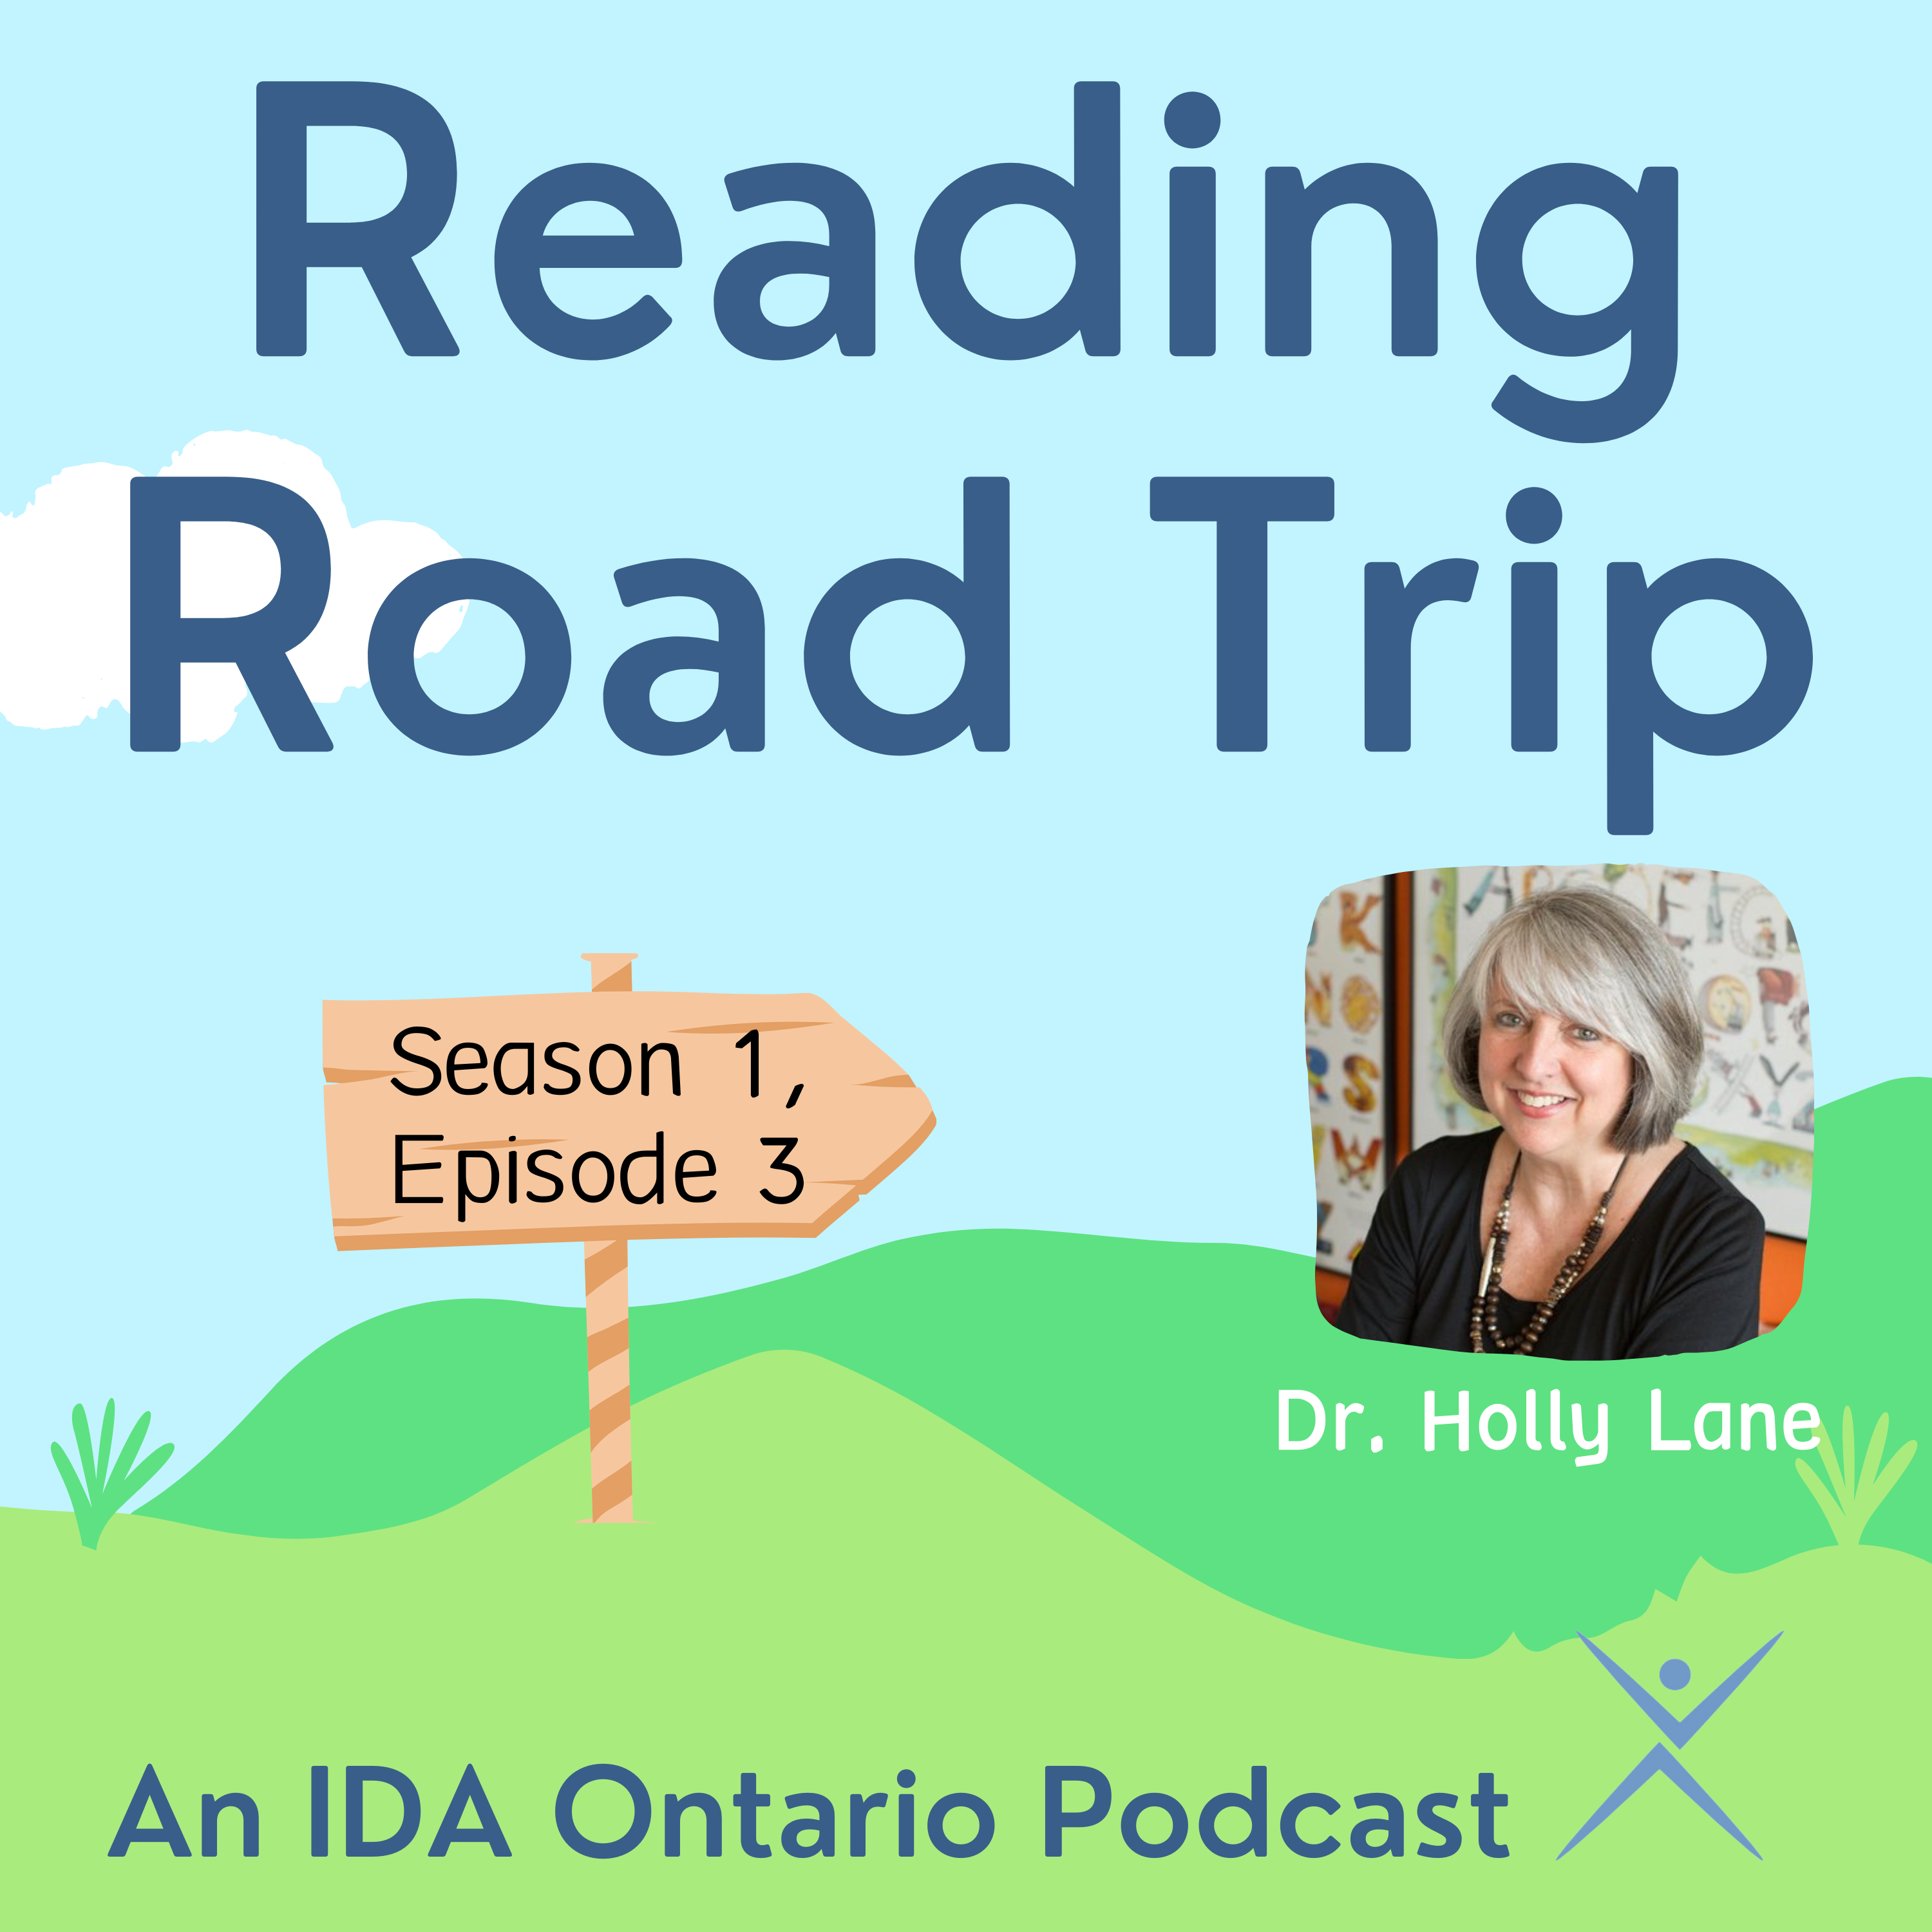 S1 E3: Foundational Literacy Skills with Dr. Holly Lane